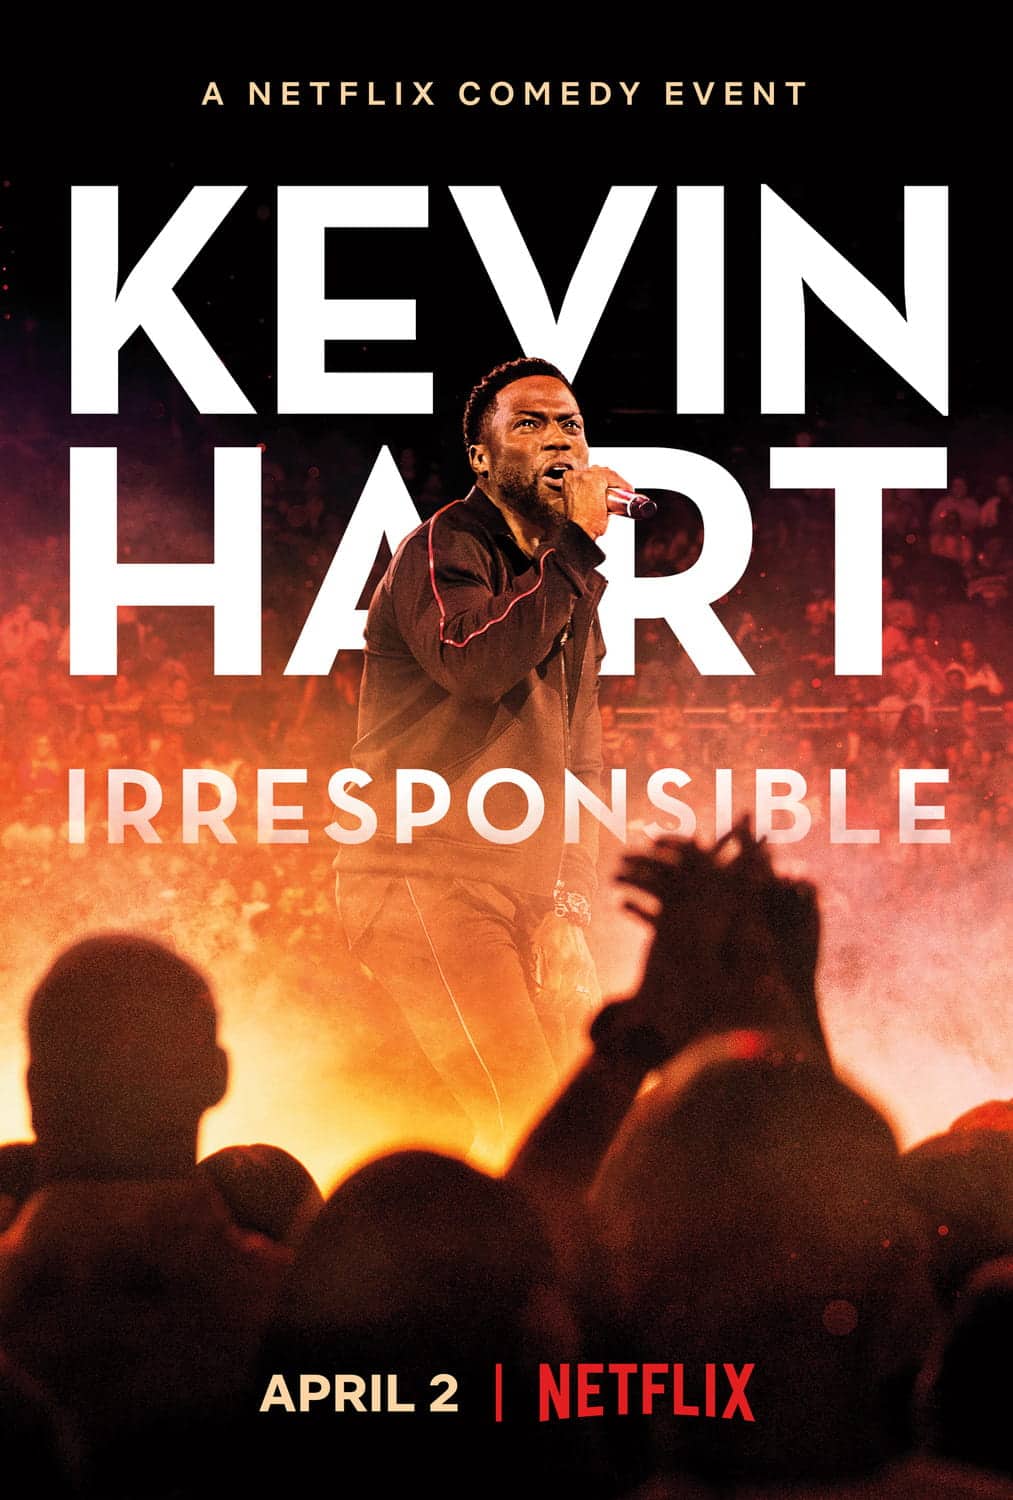 Kevin Hart Irresponsible (2019) Best Kevin Hart Movies (Ranked)